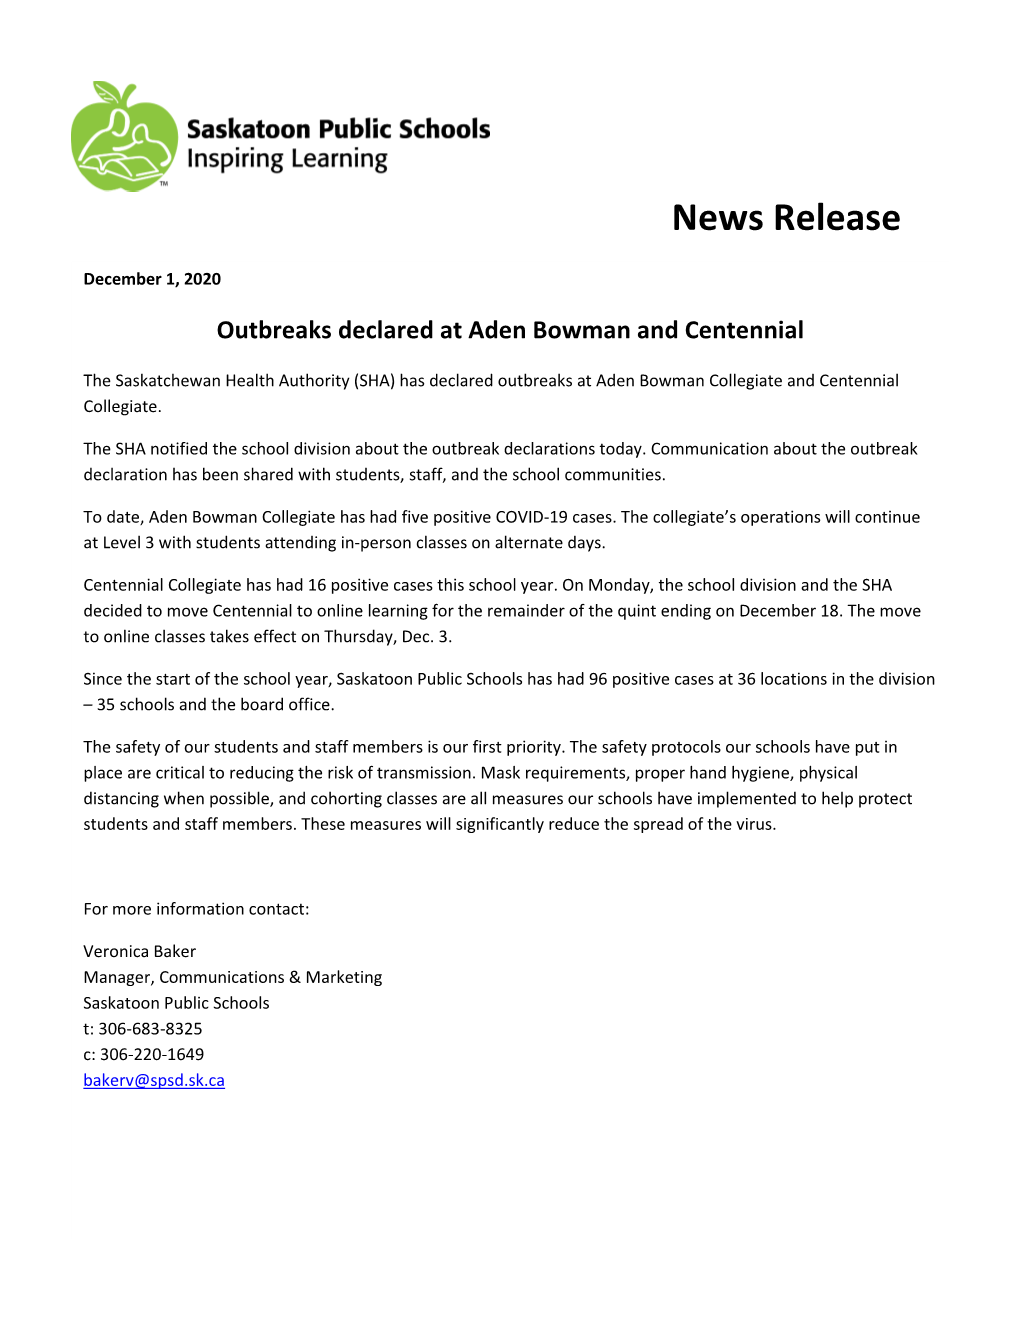 News Release December 1, 2020 Outbreaks Declared at Aden Bowman and Centennial